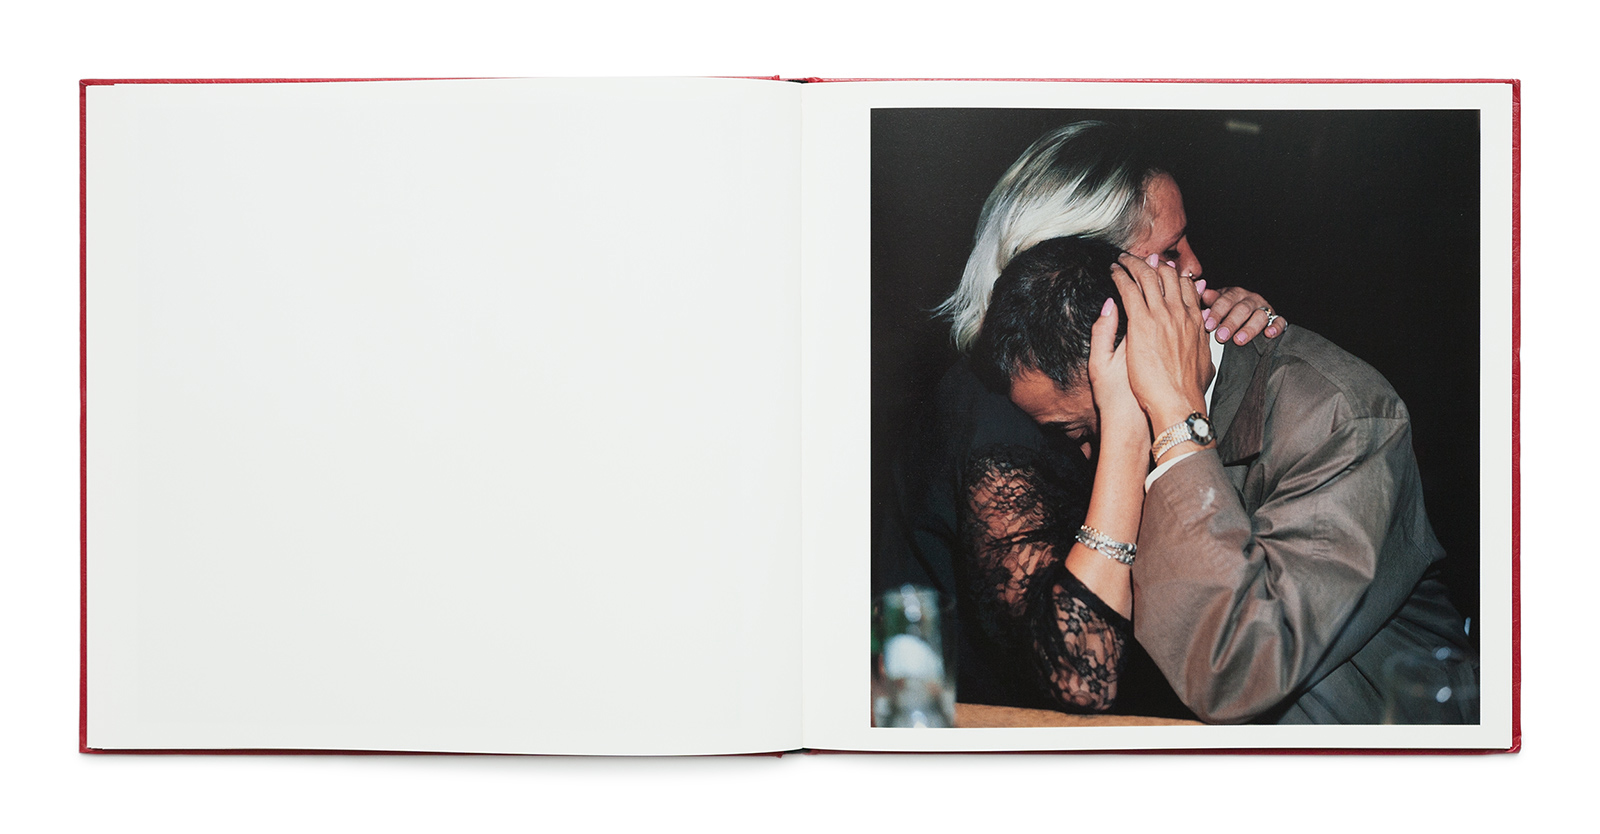 Spread from the book Now That You Are Mine by Trine Søndergaard picturing an embracing couple.